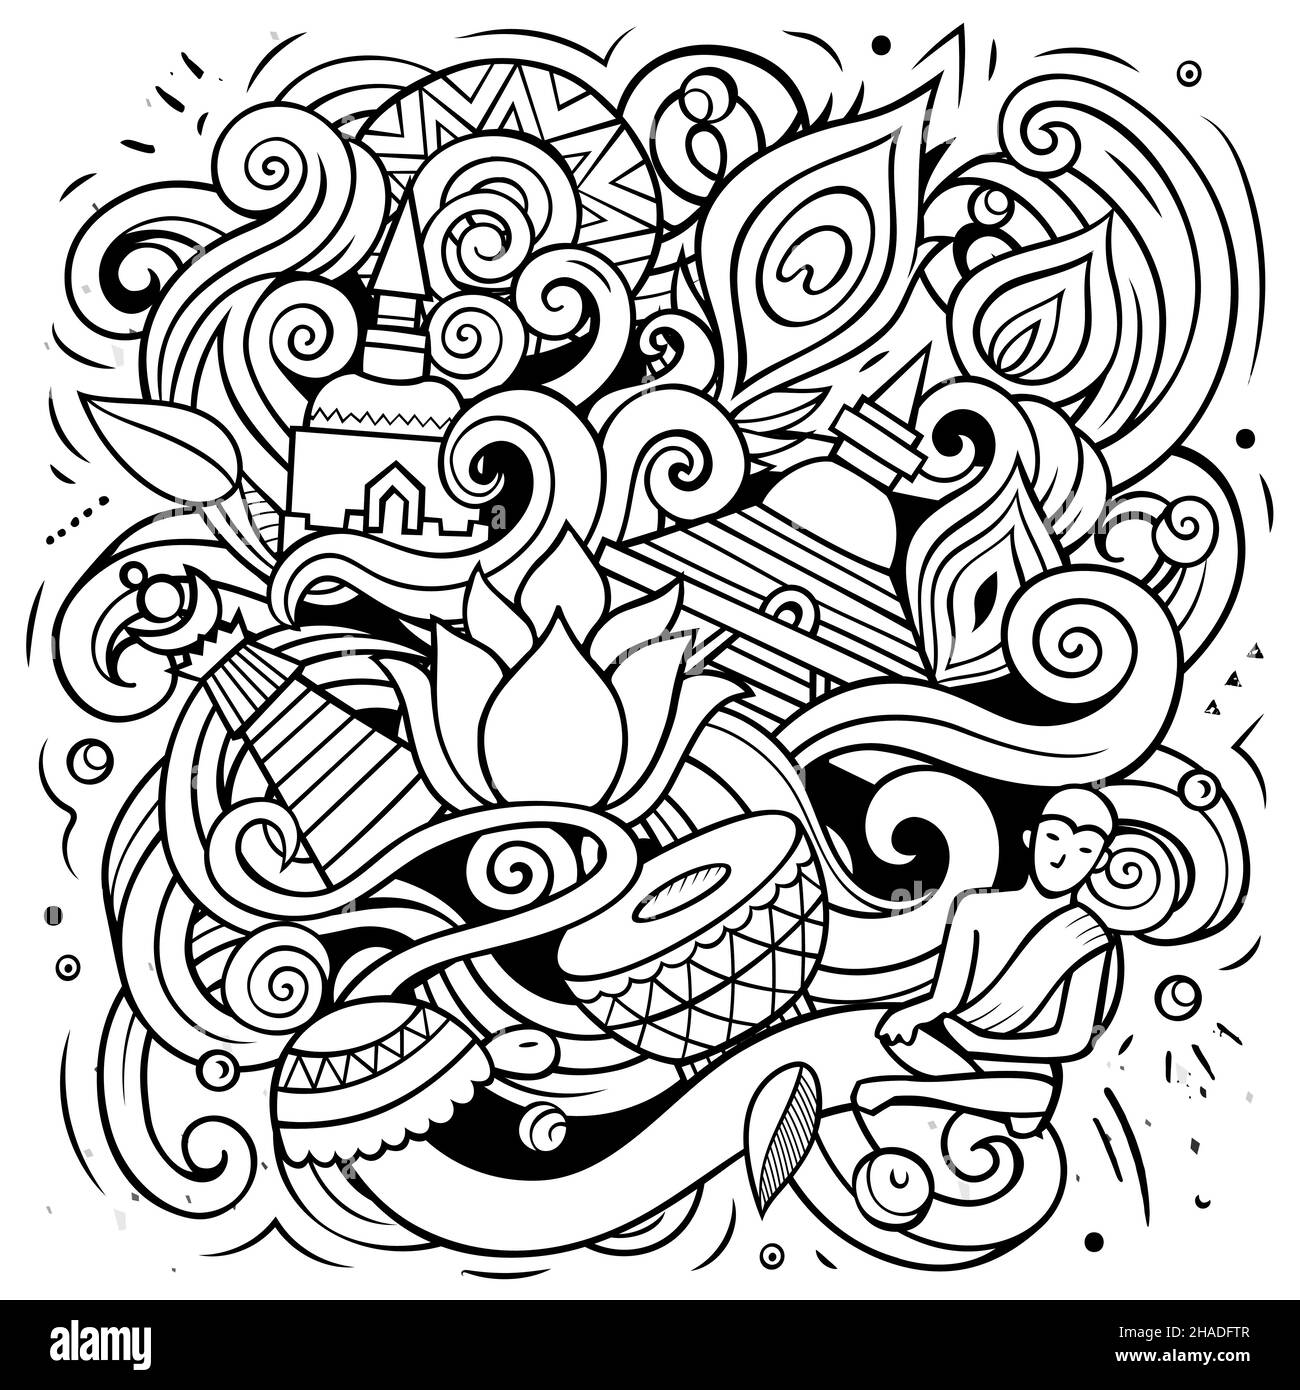 India hand drawn vector doodles illustration. Indian poster design. Funny elements and objects cartoon background. Stock Vector